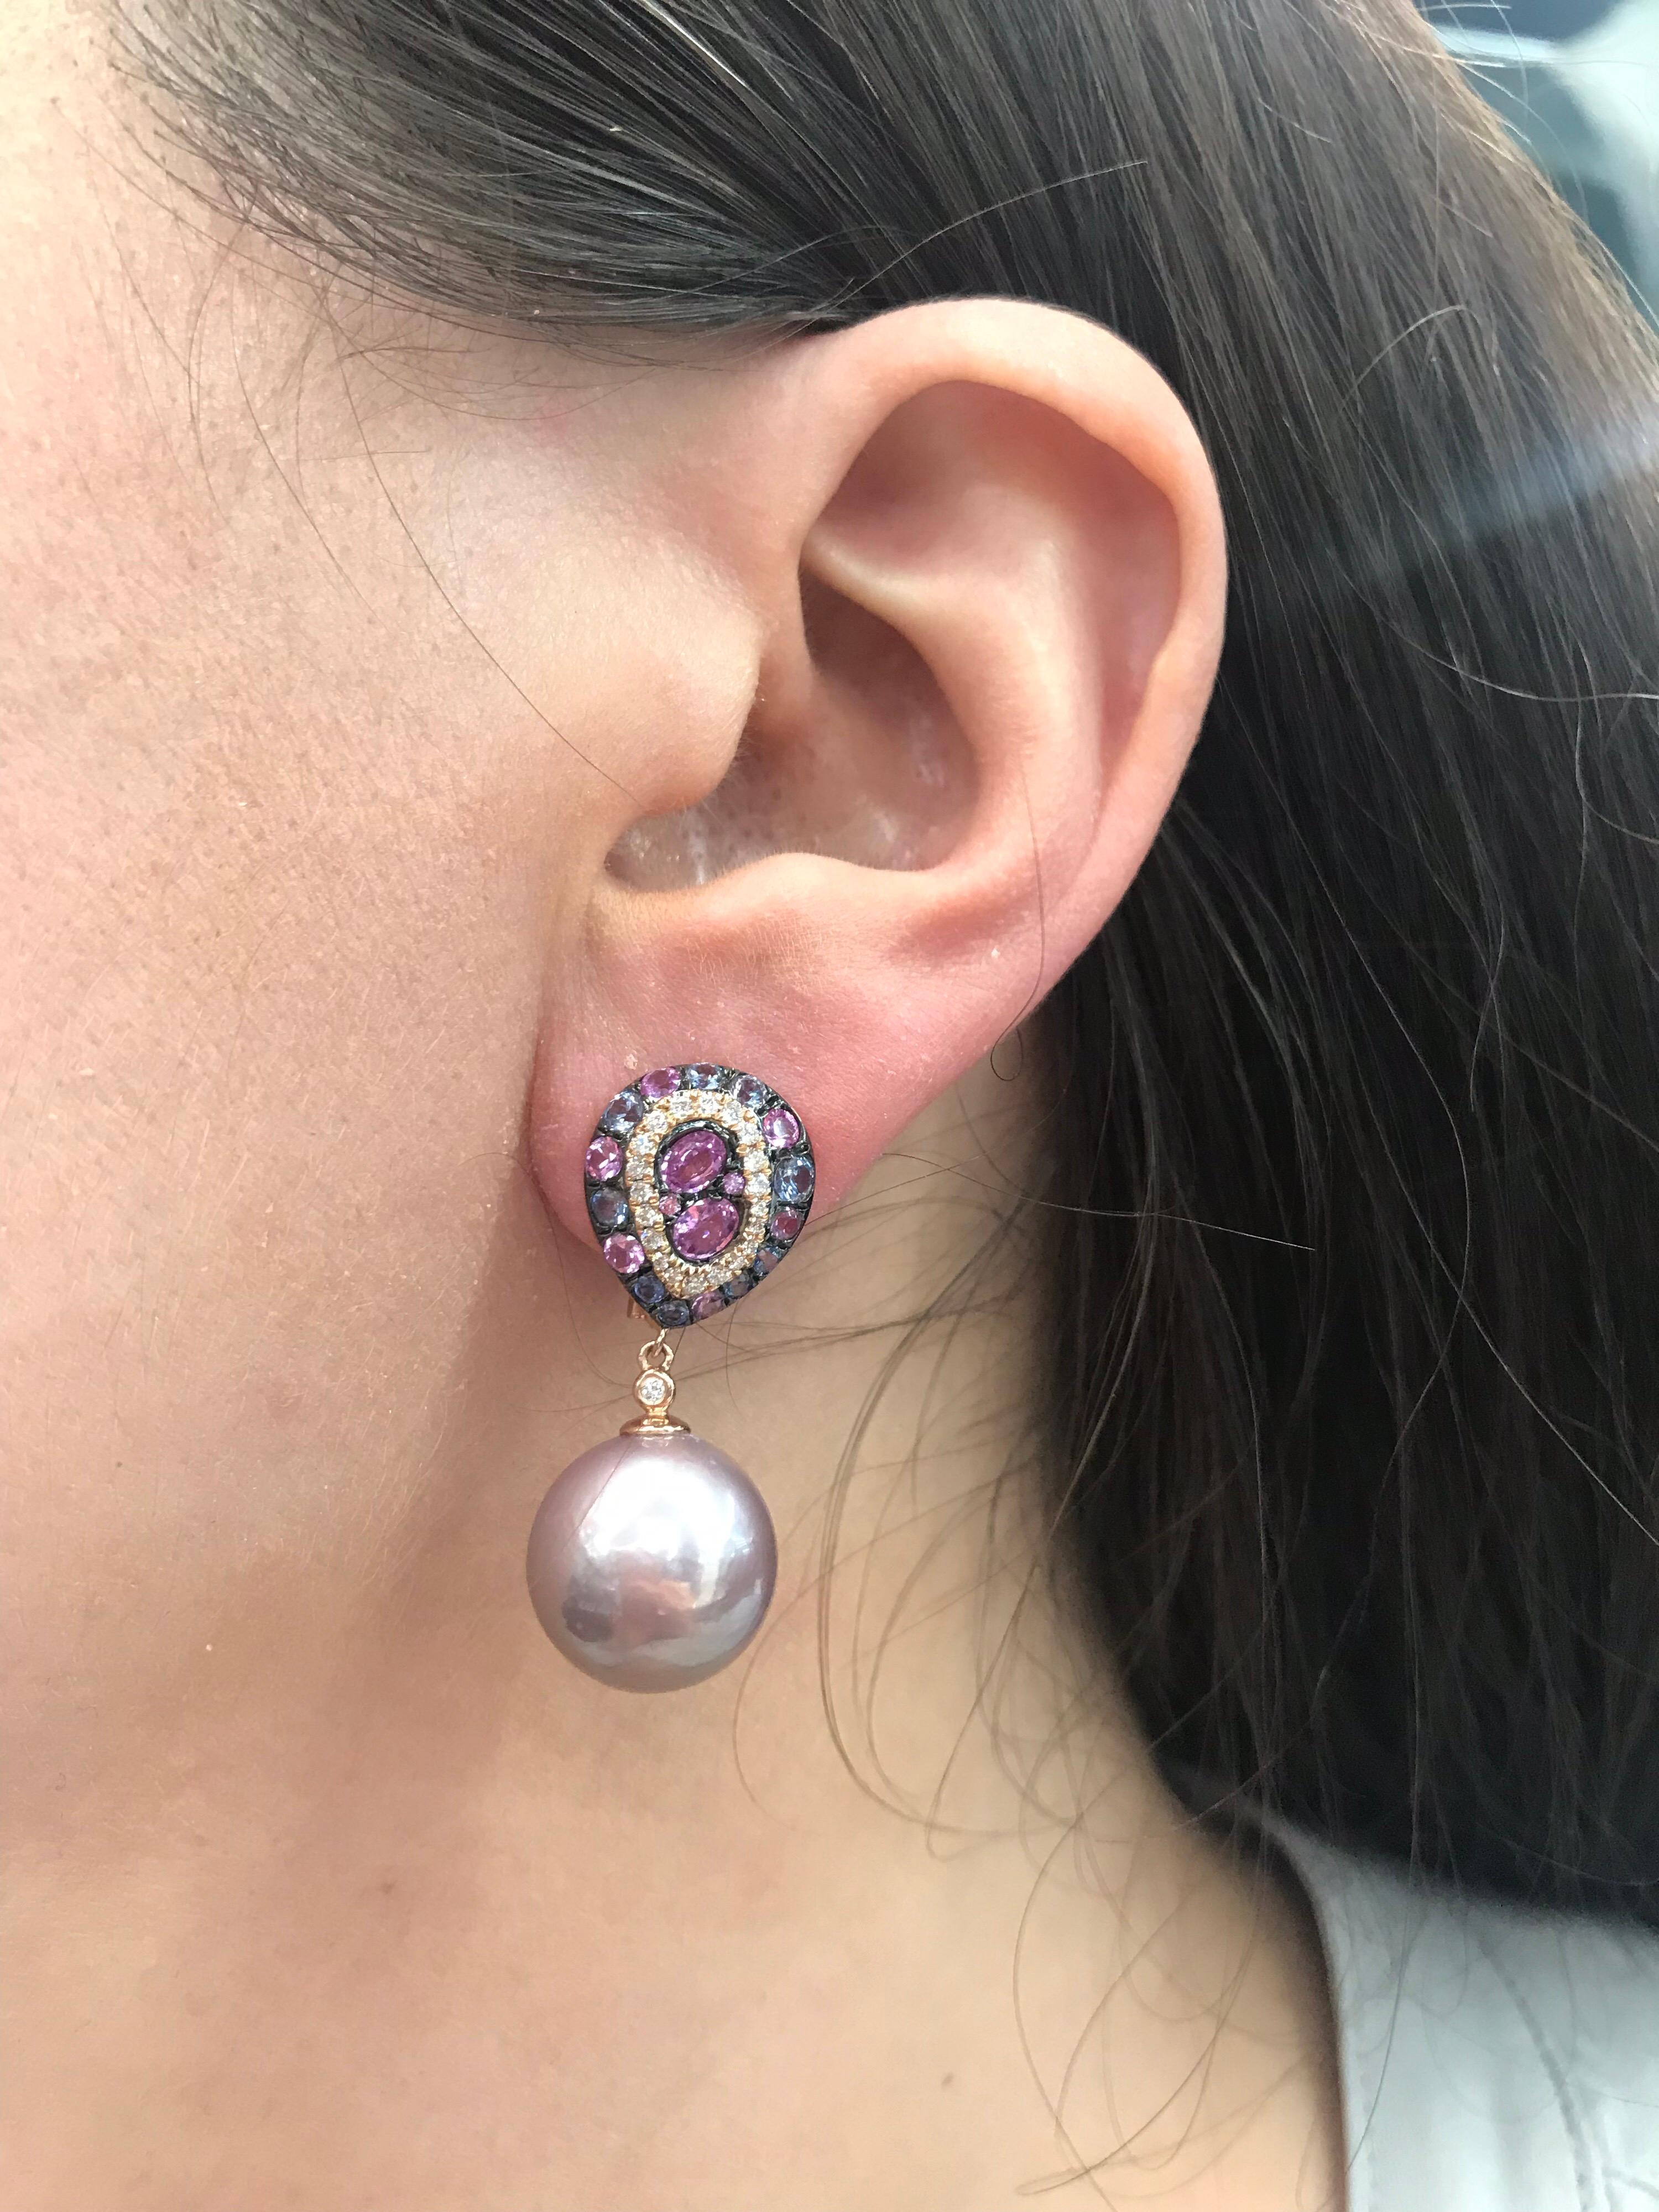 18K Rose Gold drop earrings featuring a cluster of blue sapphires, 0.97 carats, and pink sapphires, 1.41 carats, with round brilliants weighing 0.31 carats. Comes in white South Sea Pearls or Pink Freshwater pearls measuring 13-14 mm. 
Price